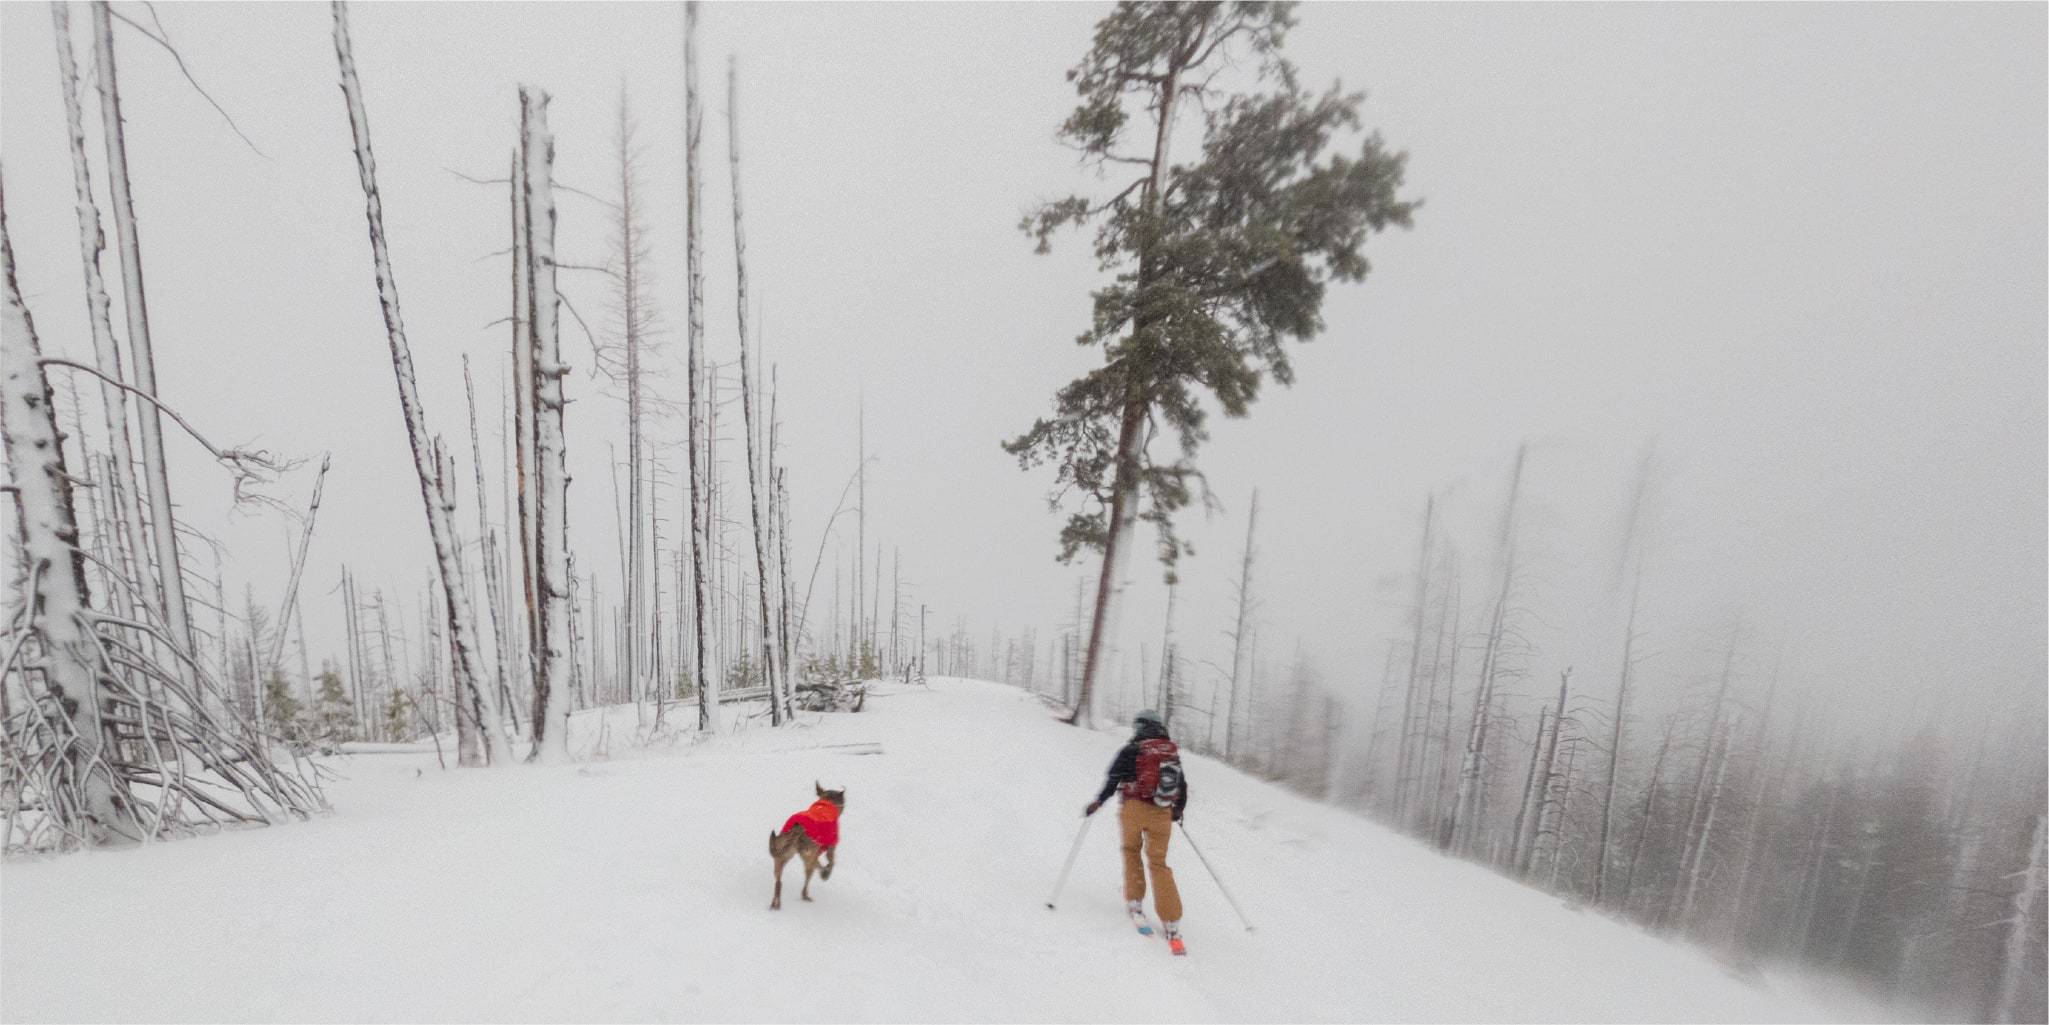 Man skiing down the mountain with his dog running alongside